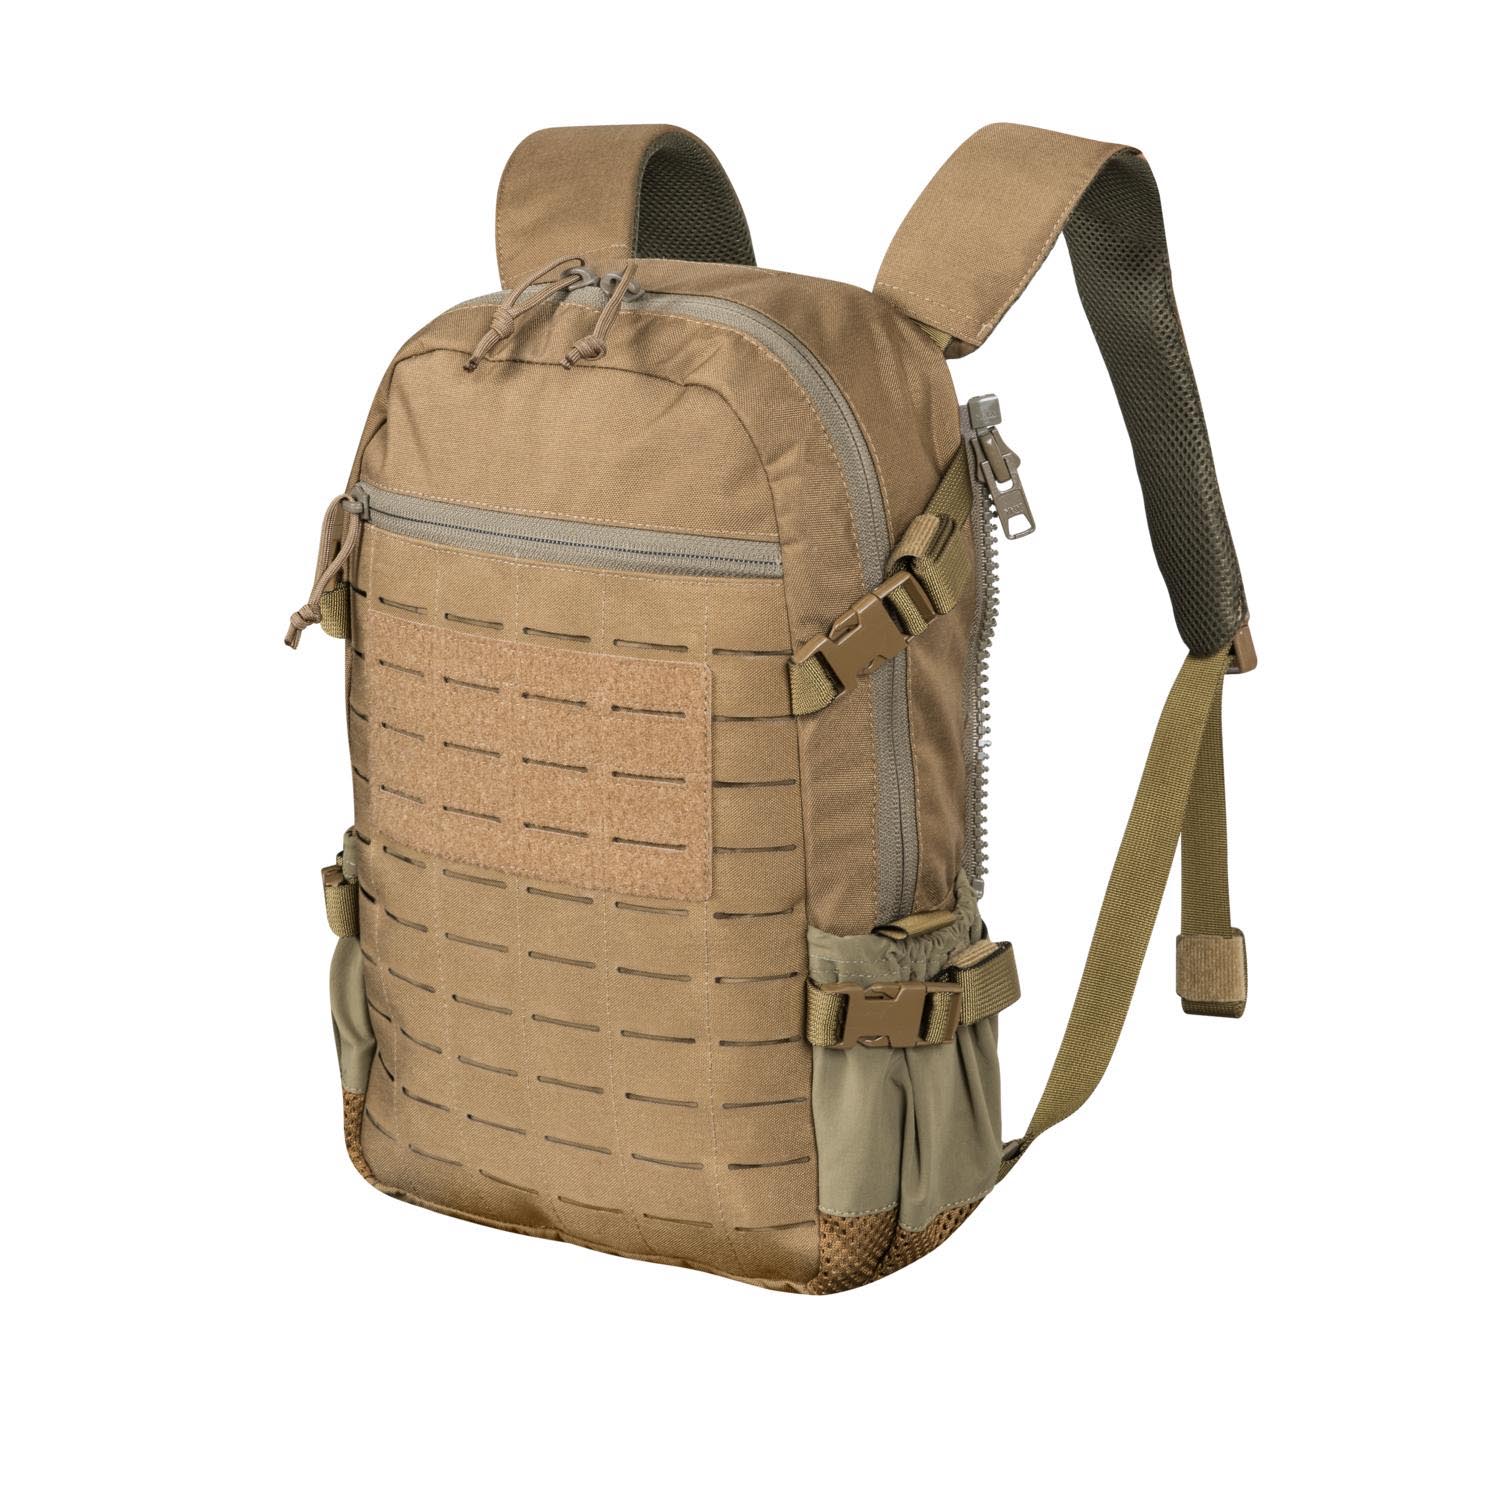 Direct Action Spitfire MK II Backpack panel coyote brown